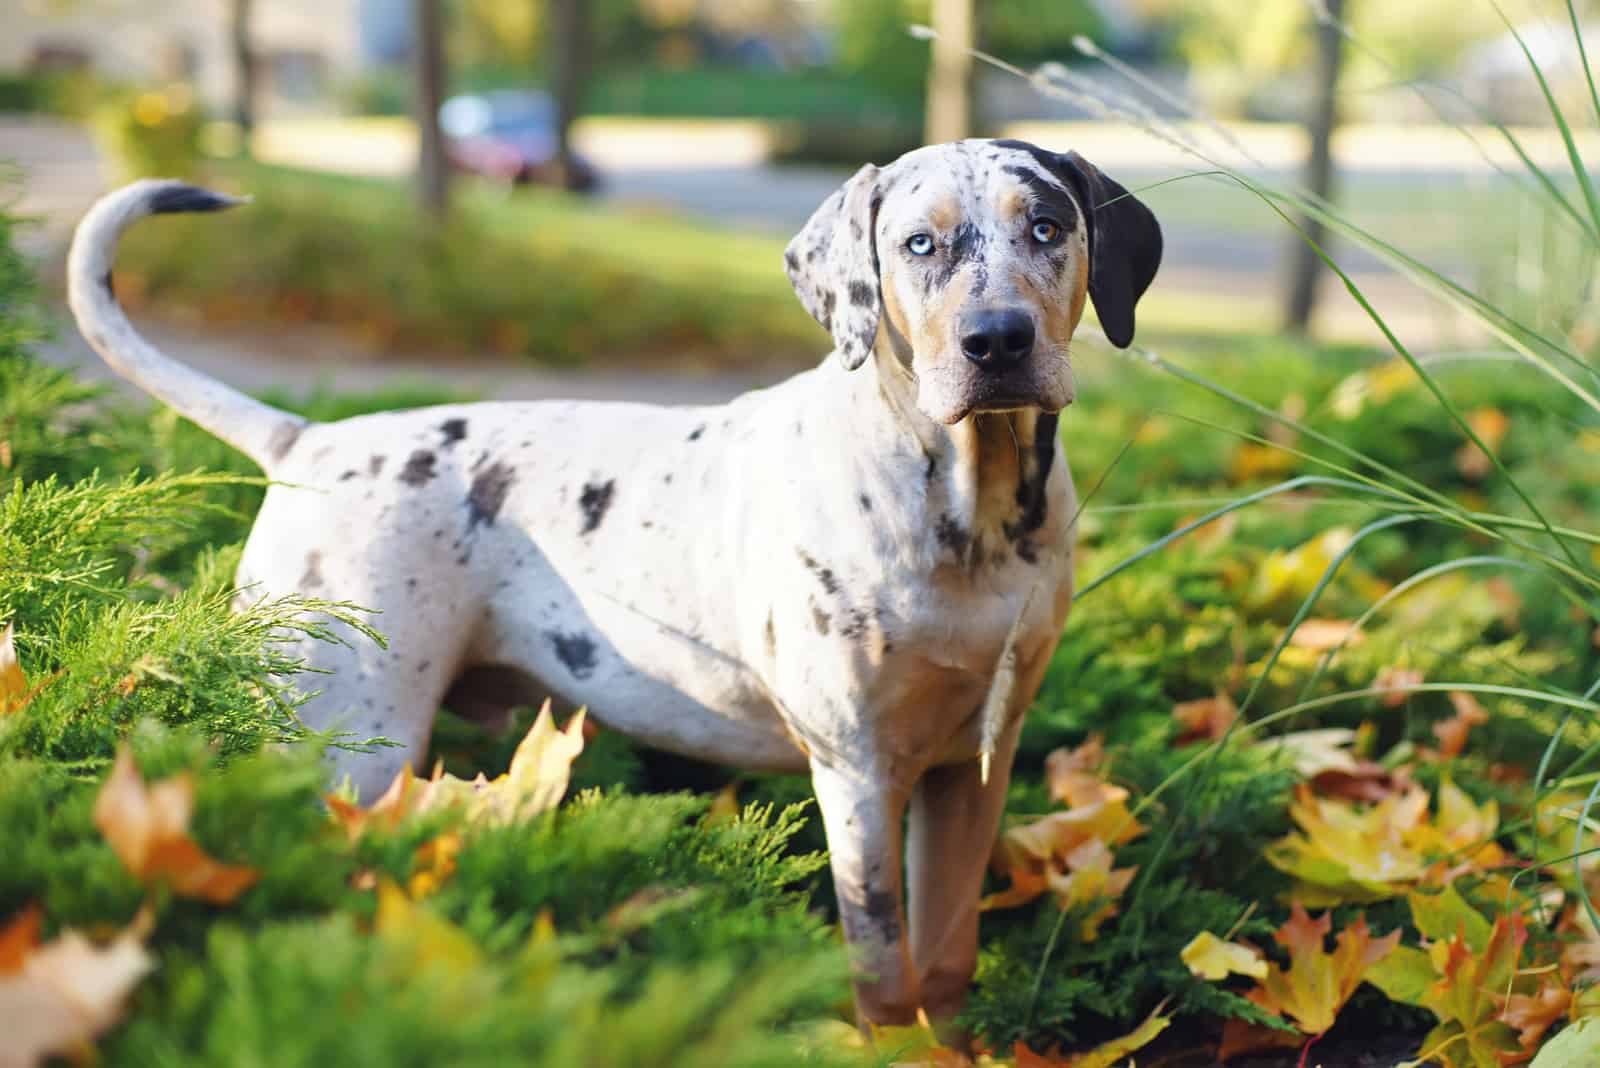 Catahoula Leopard Dog standing in the grass